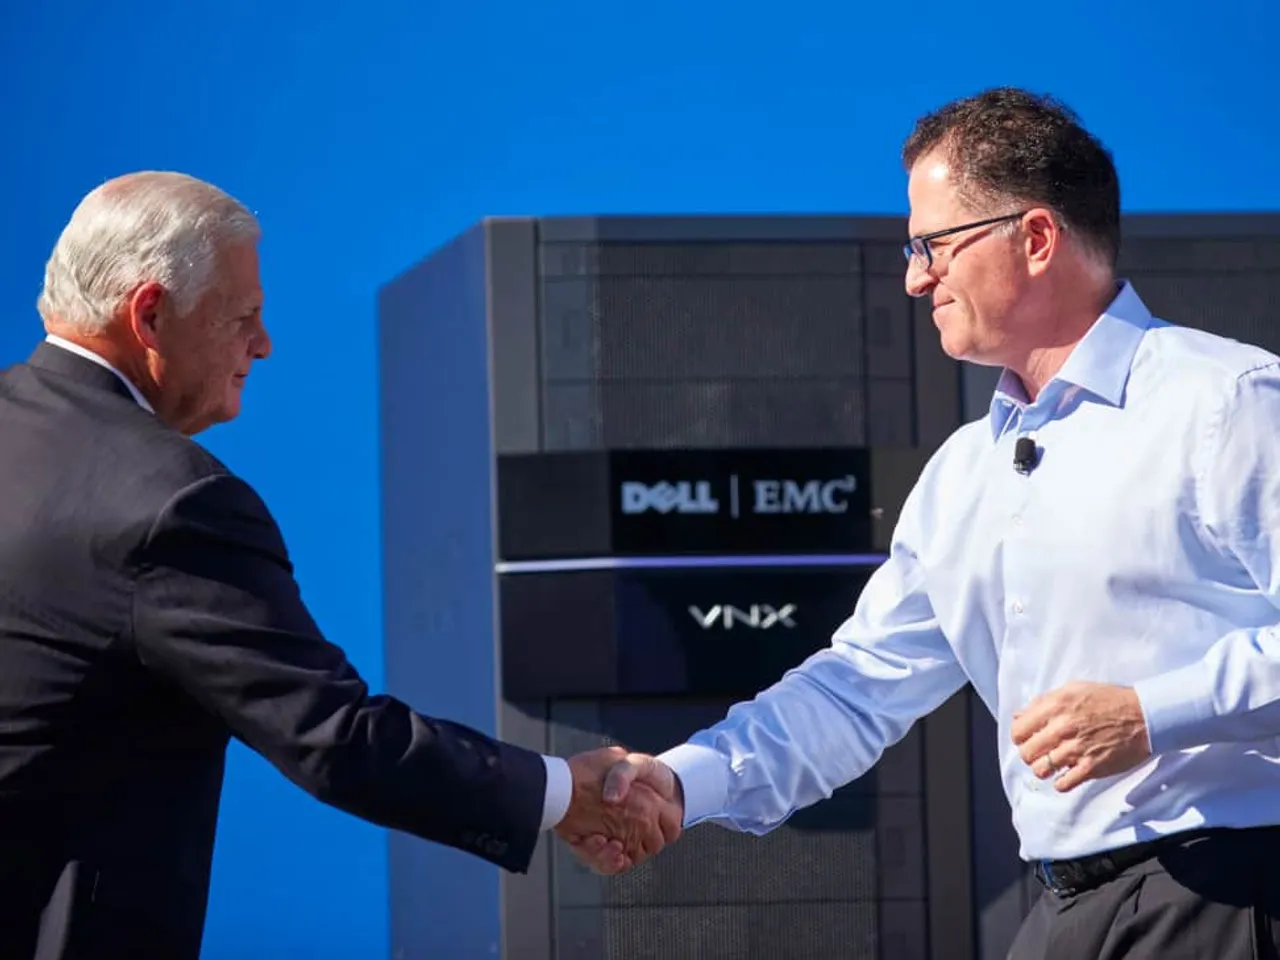 Historic Dell and EMC Merger Complete